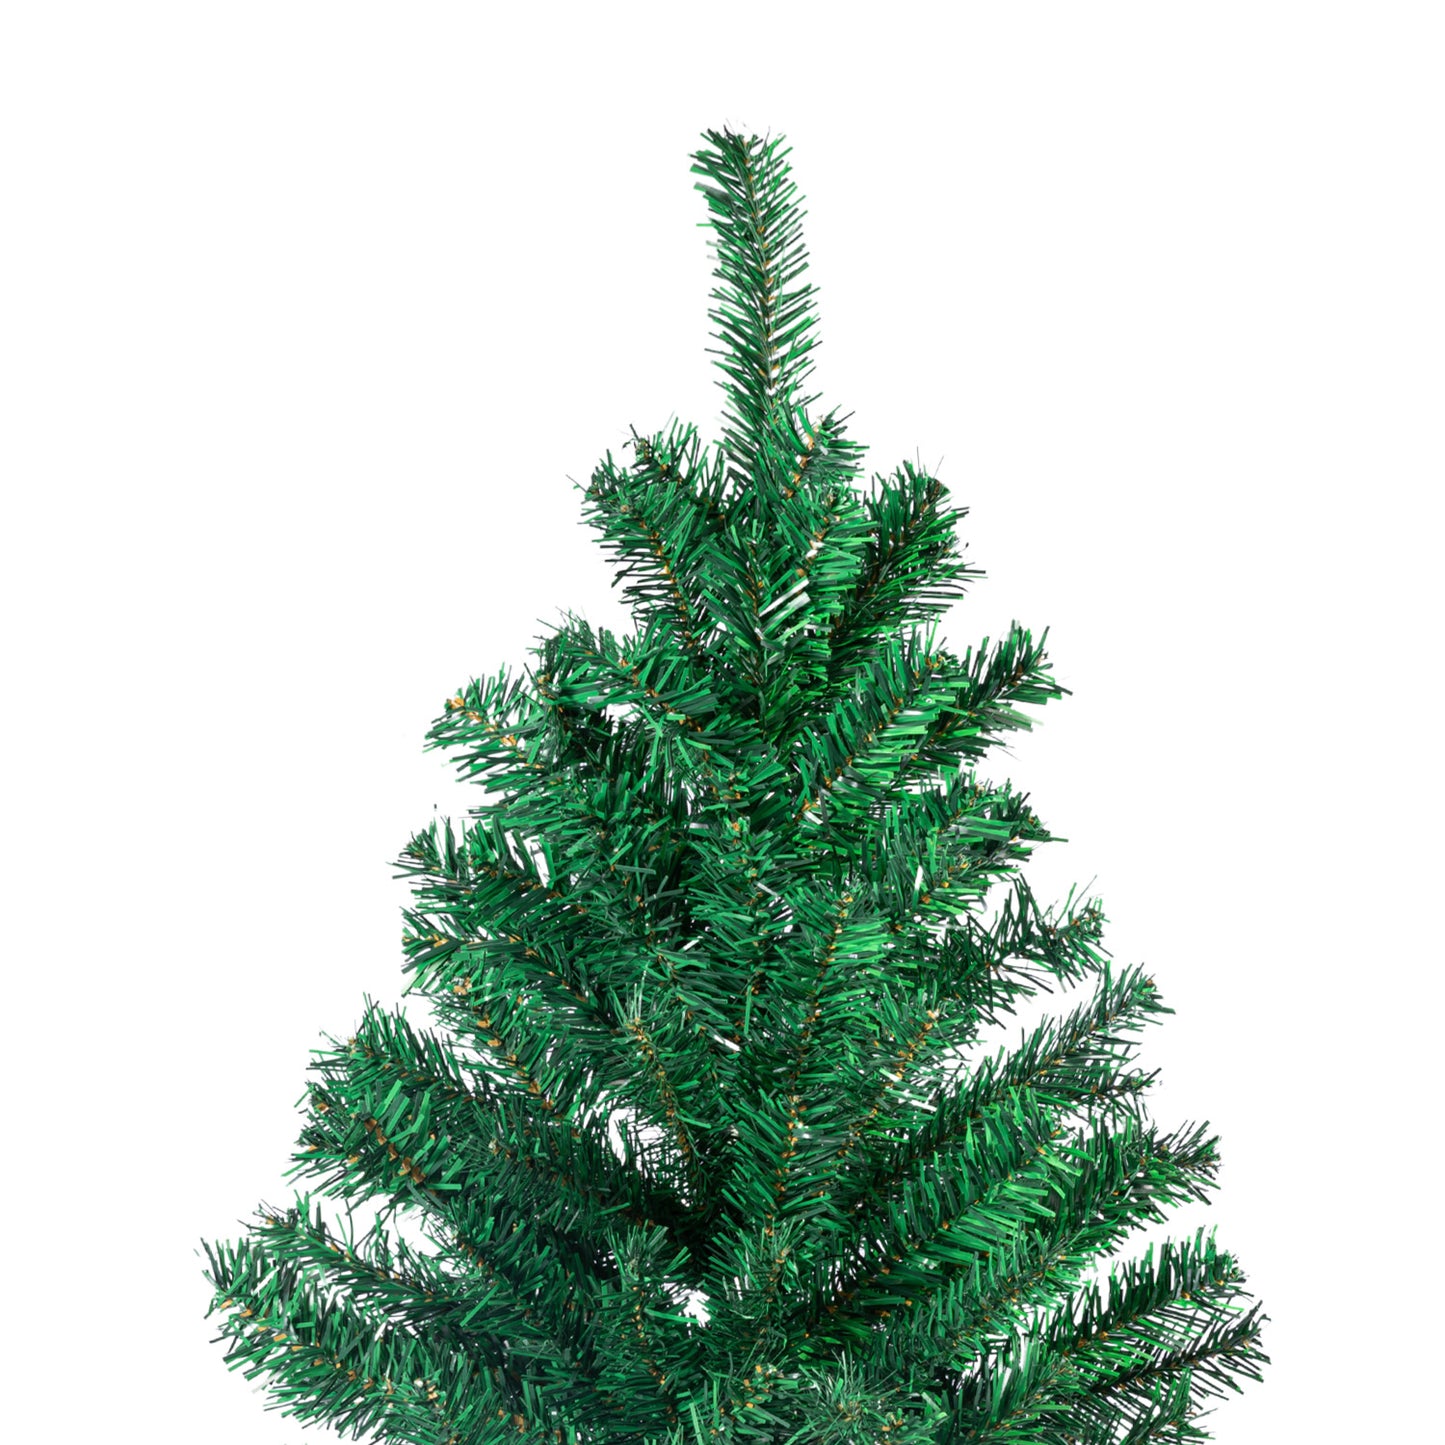 Christabelle Green Christmas Tree 2.4m Xmas Decor Decorations - 1500 Tips